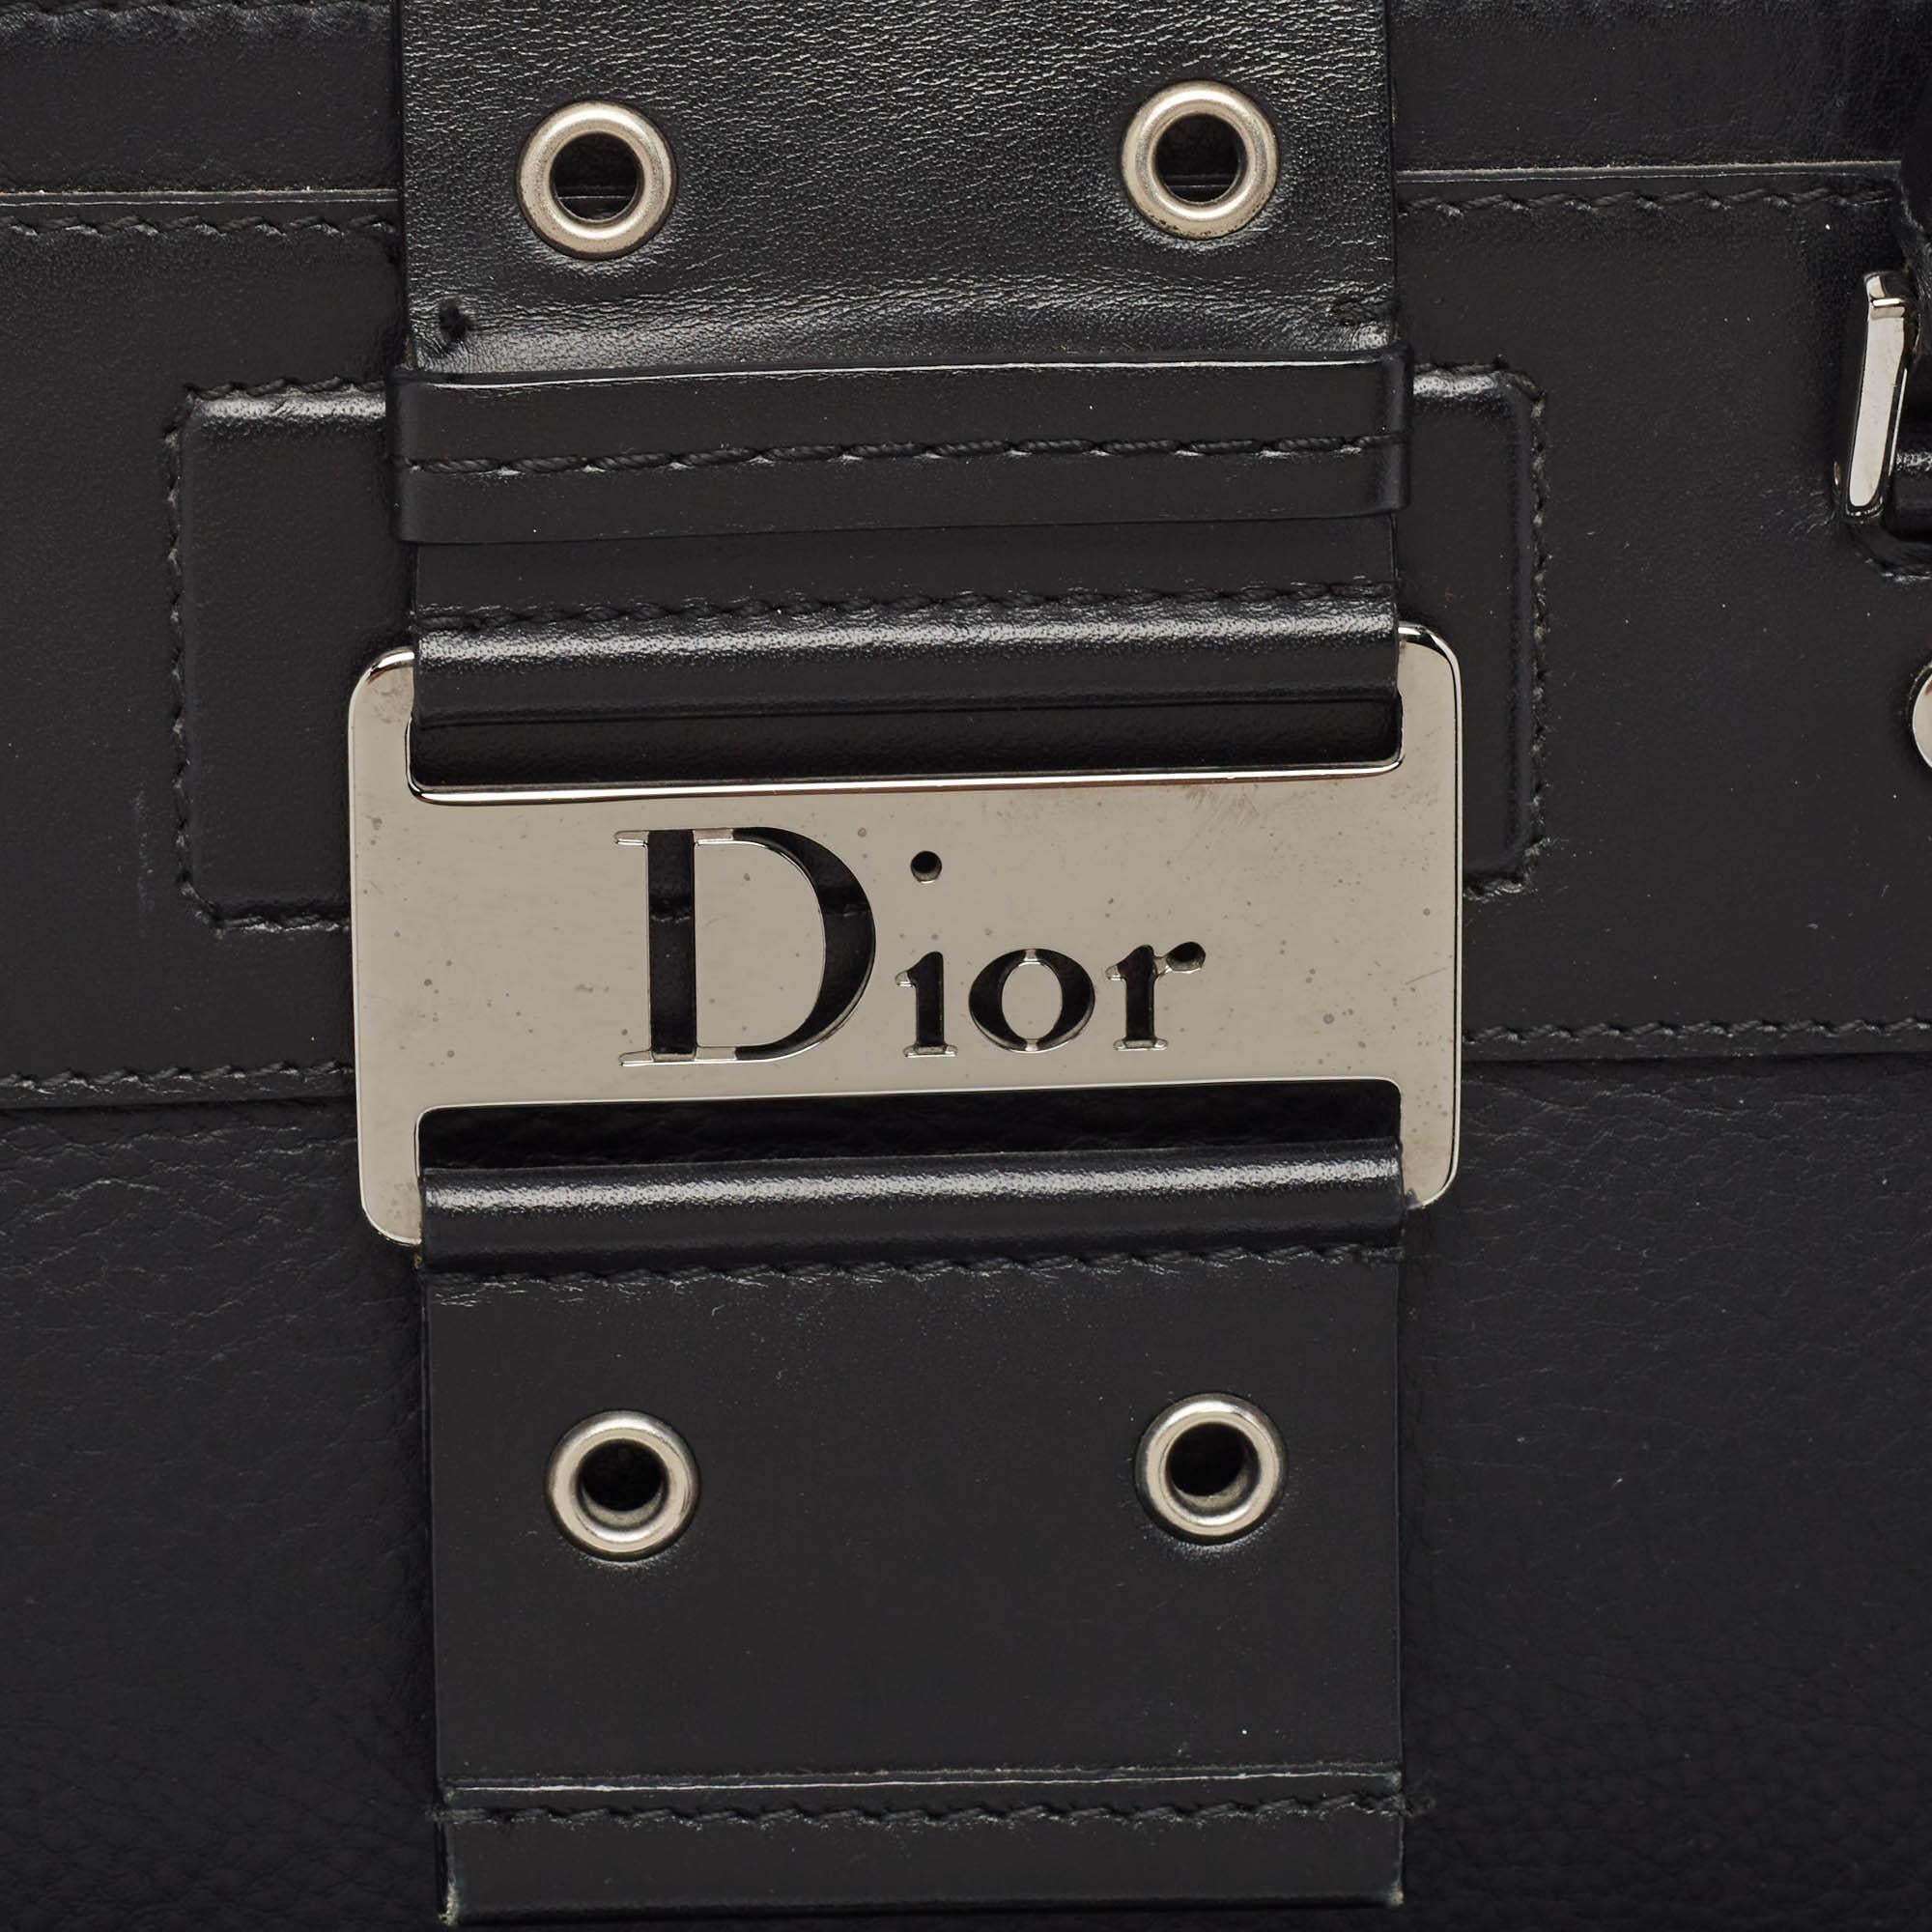 Dior Black Leather Street Chic Satchel For Sale 10